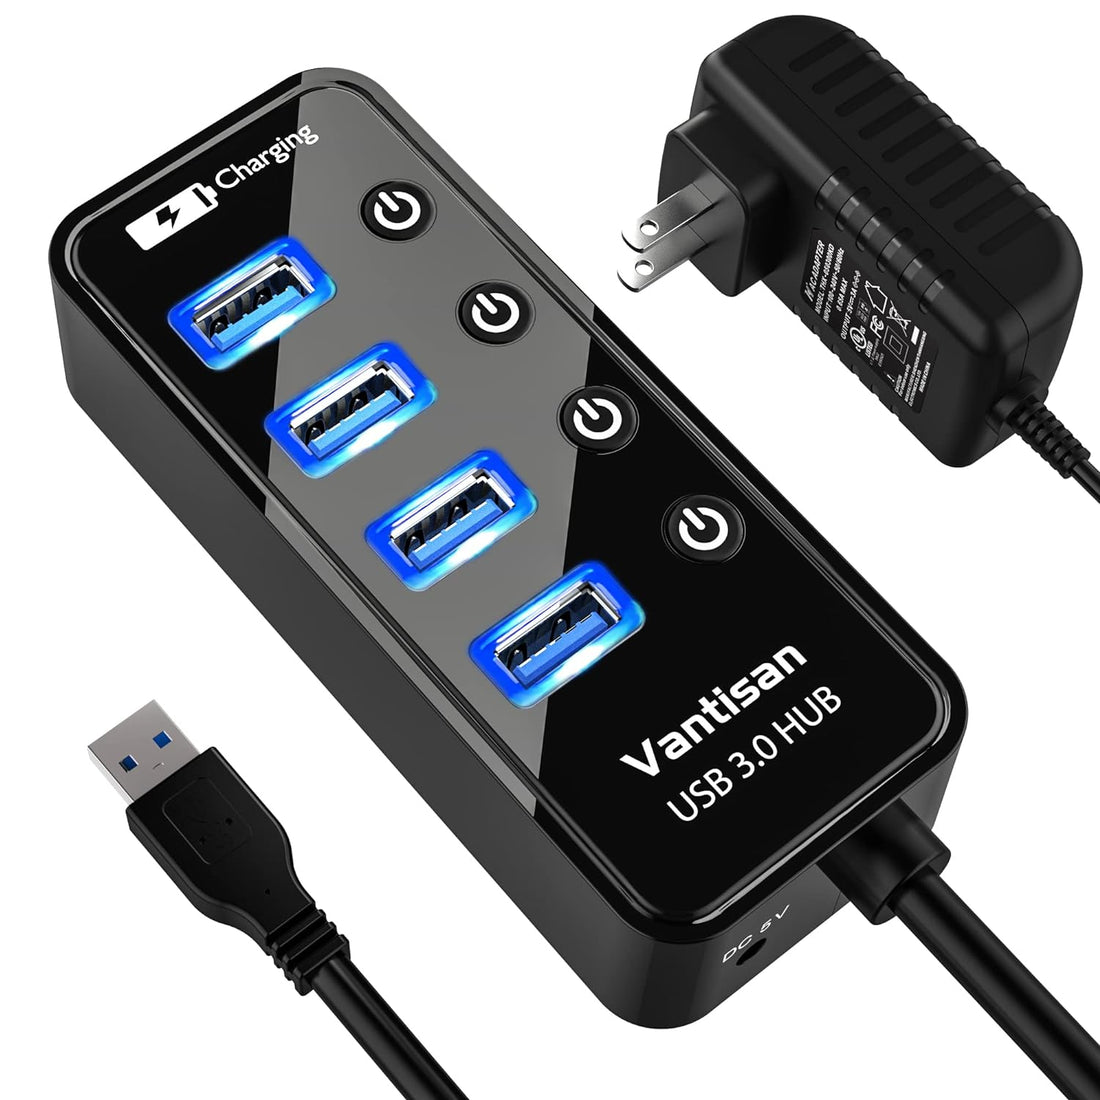 vantisan Powered USB 3.0 Hub, USB Extension 4-Port USB Hub Splitter (4 USB 3.0 Data Ports+1 Smart Charging Port) with 5V/3A Powered Adapter and Individual ON/Off Switches